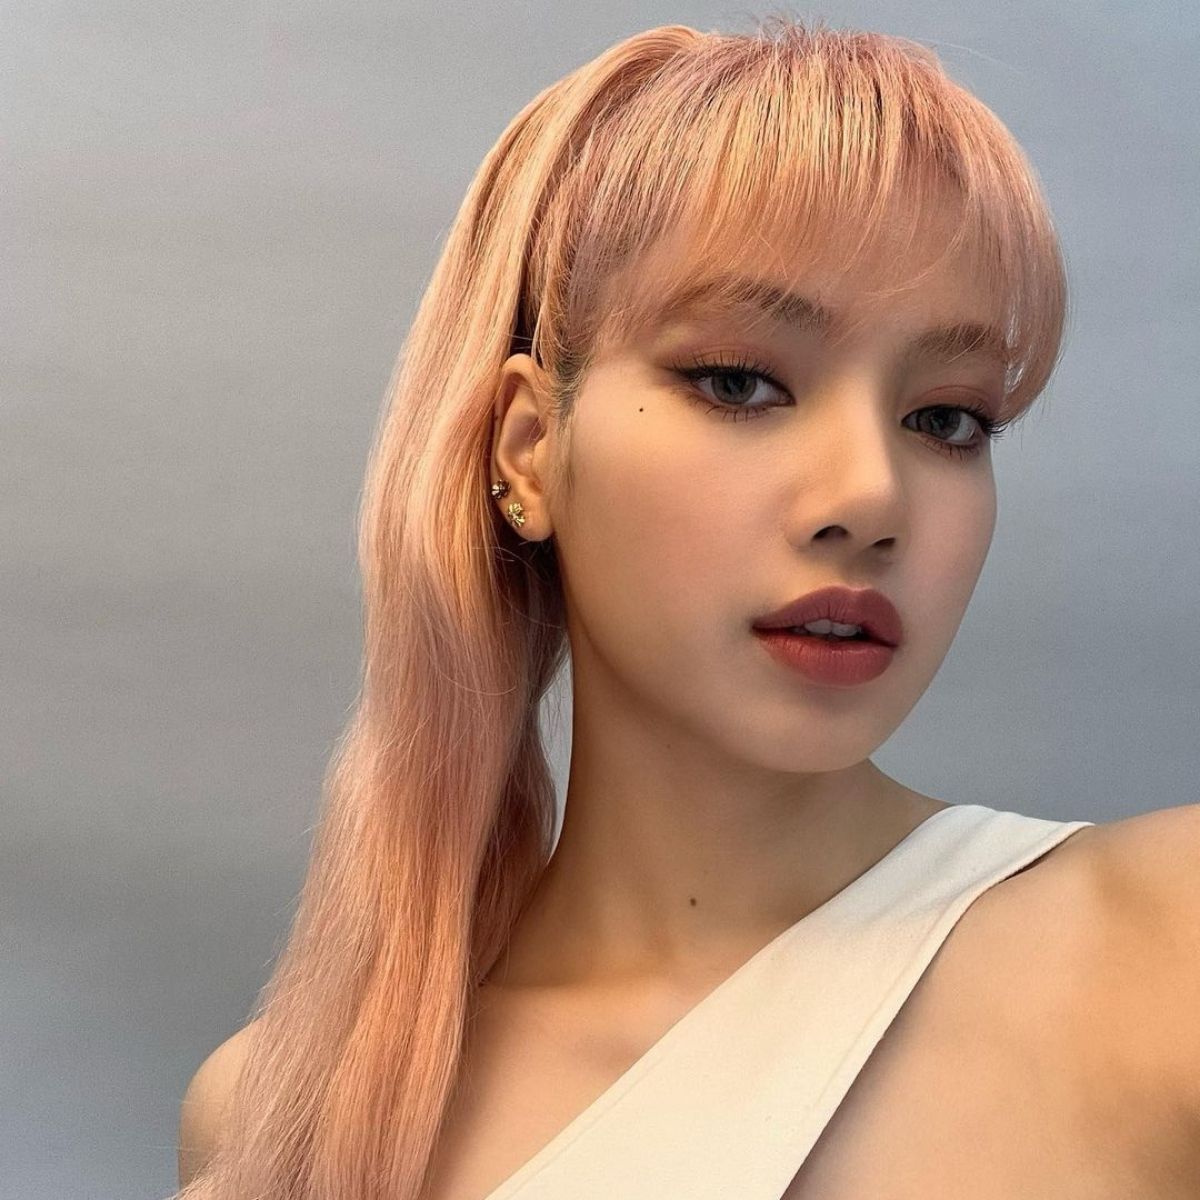 PHOTOS: BLACKPINK\'s Lisa owns the selfie game with her sleek style ...